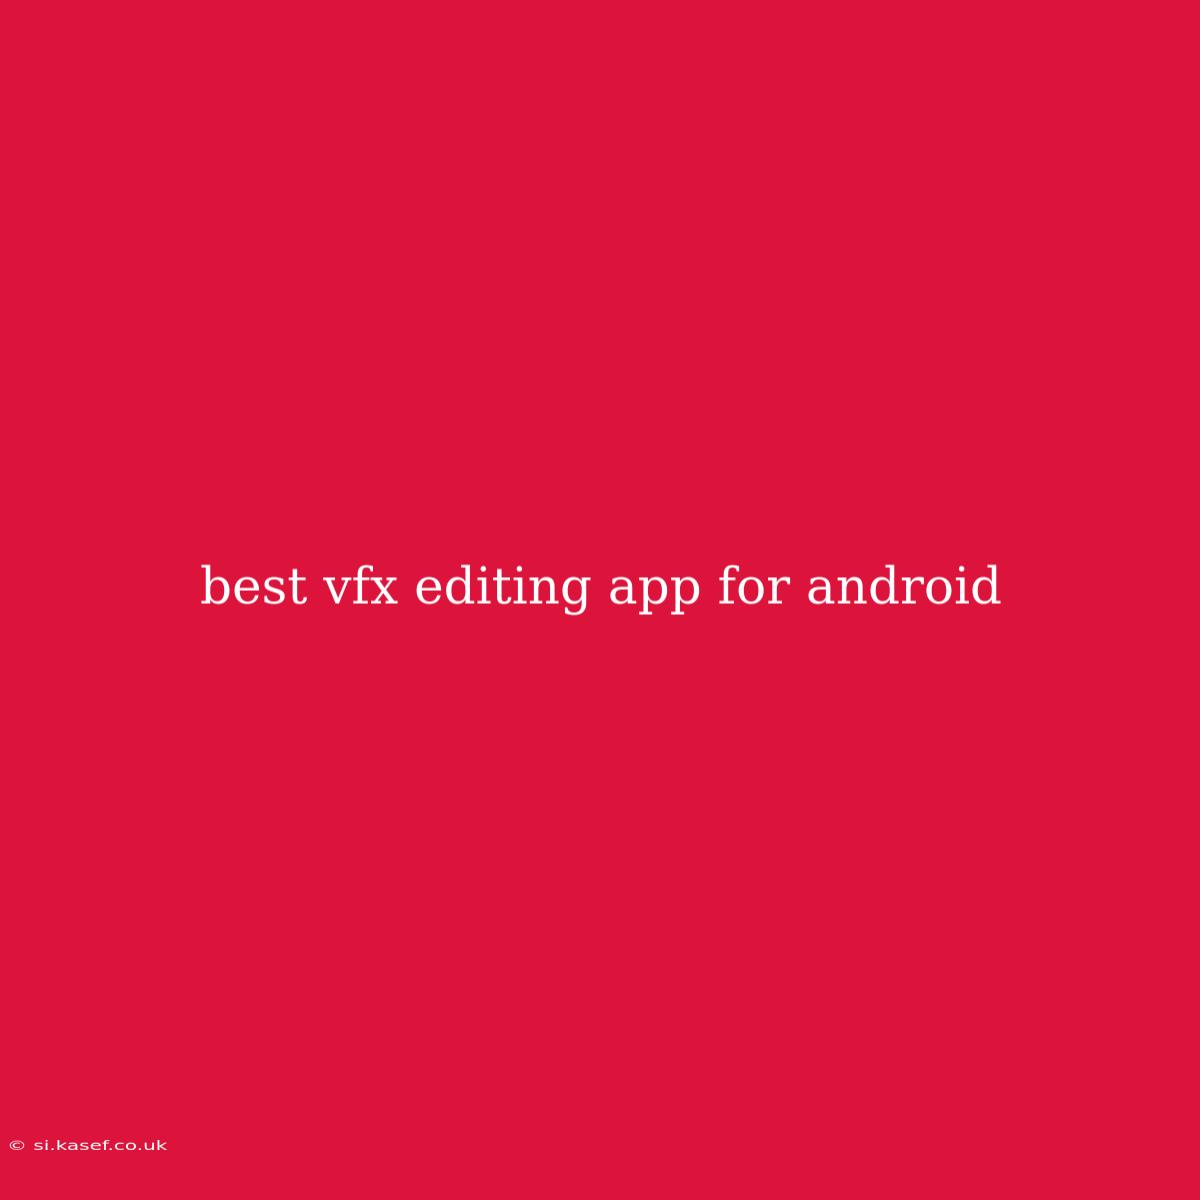 Best Vfx Editing App For Android